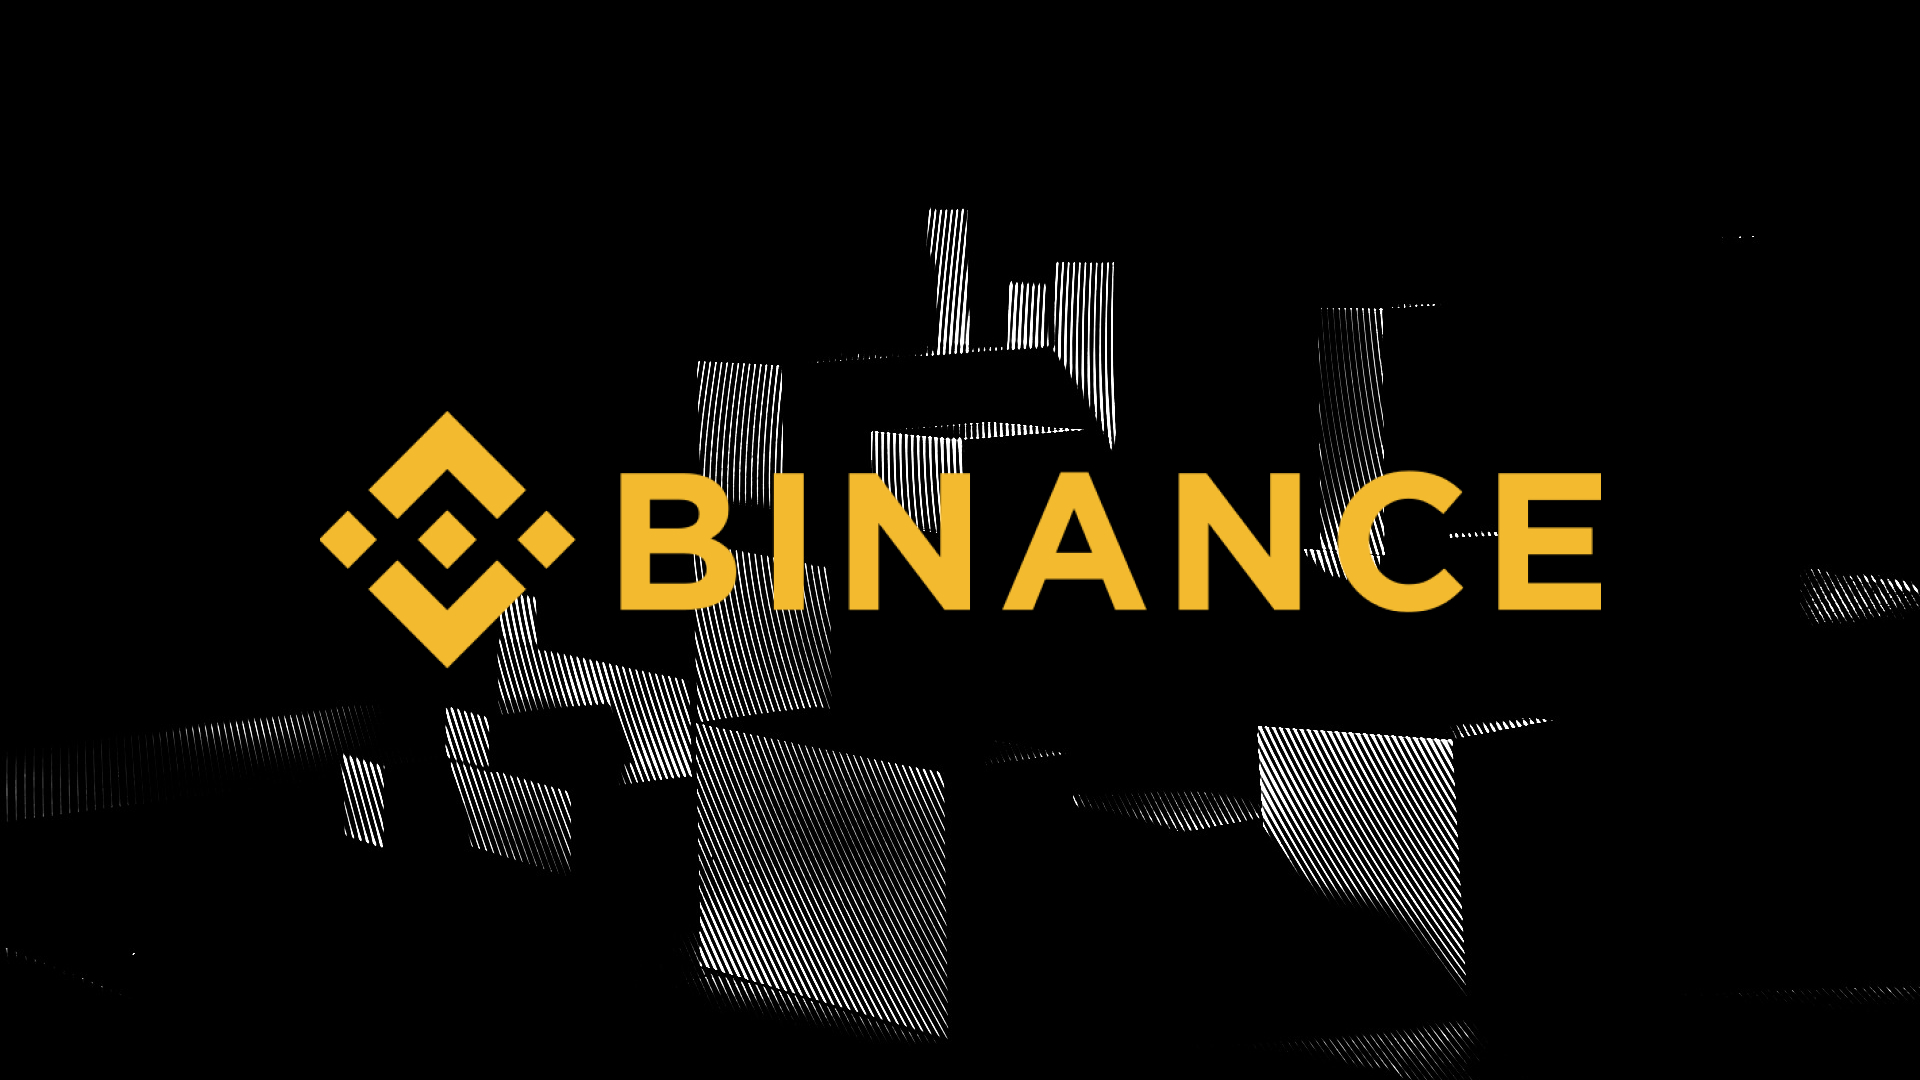 Binance Launches Trading Bots, Shifts To Automation